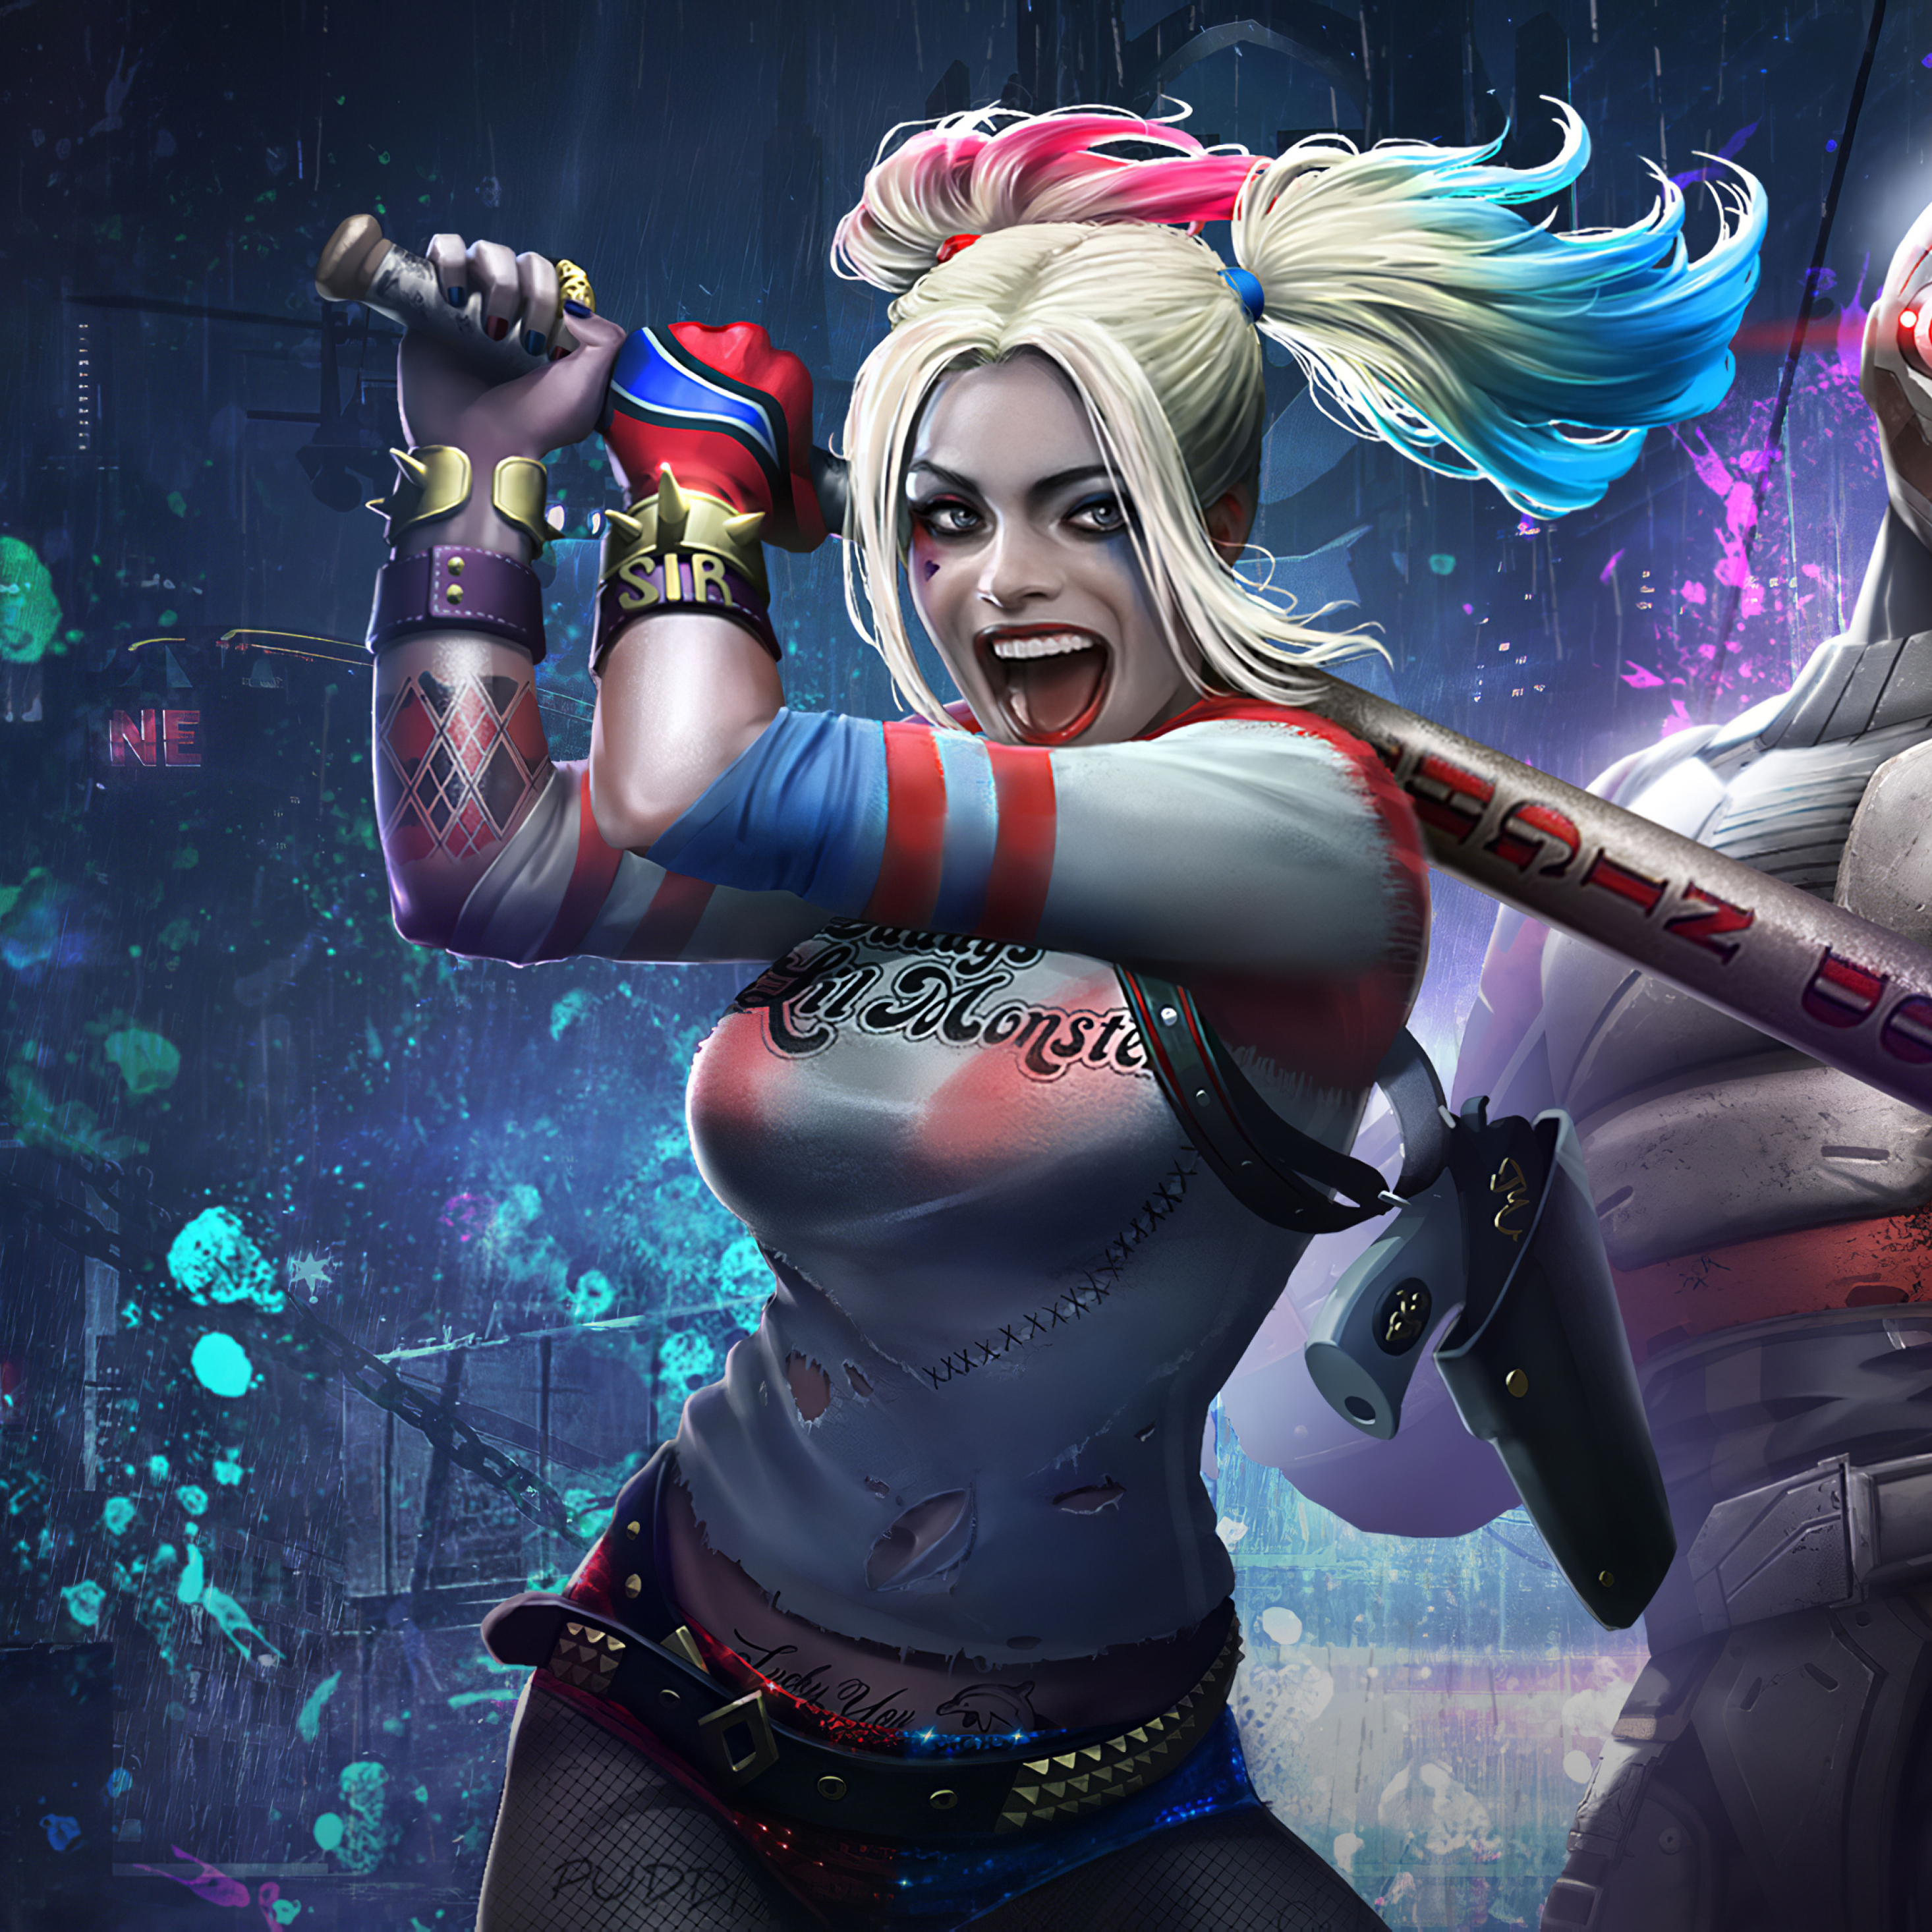 2932x2932 Harley Quinn & Deadshot Injustice 2 Mobile Ipad Pro Retina Display  Wallpaper, HD Games 4K Wallpapers, Images, Photos and Background -  Wallpapers Den